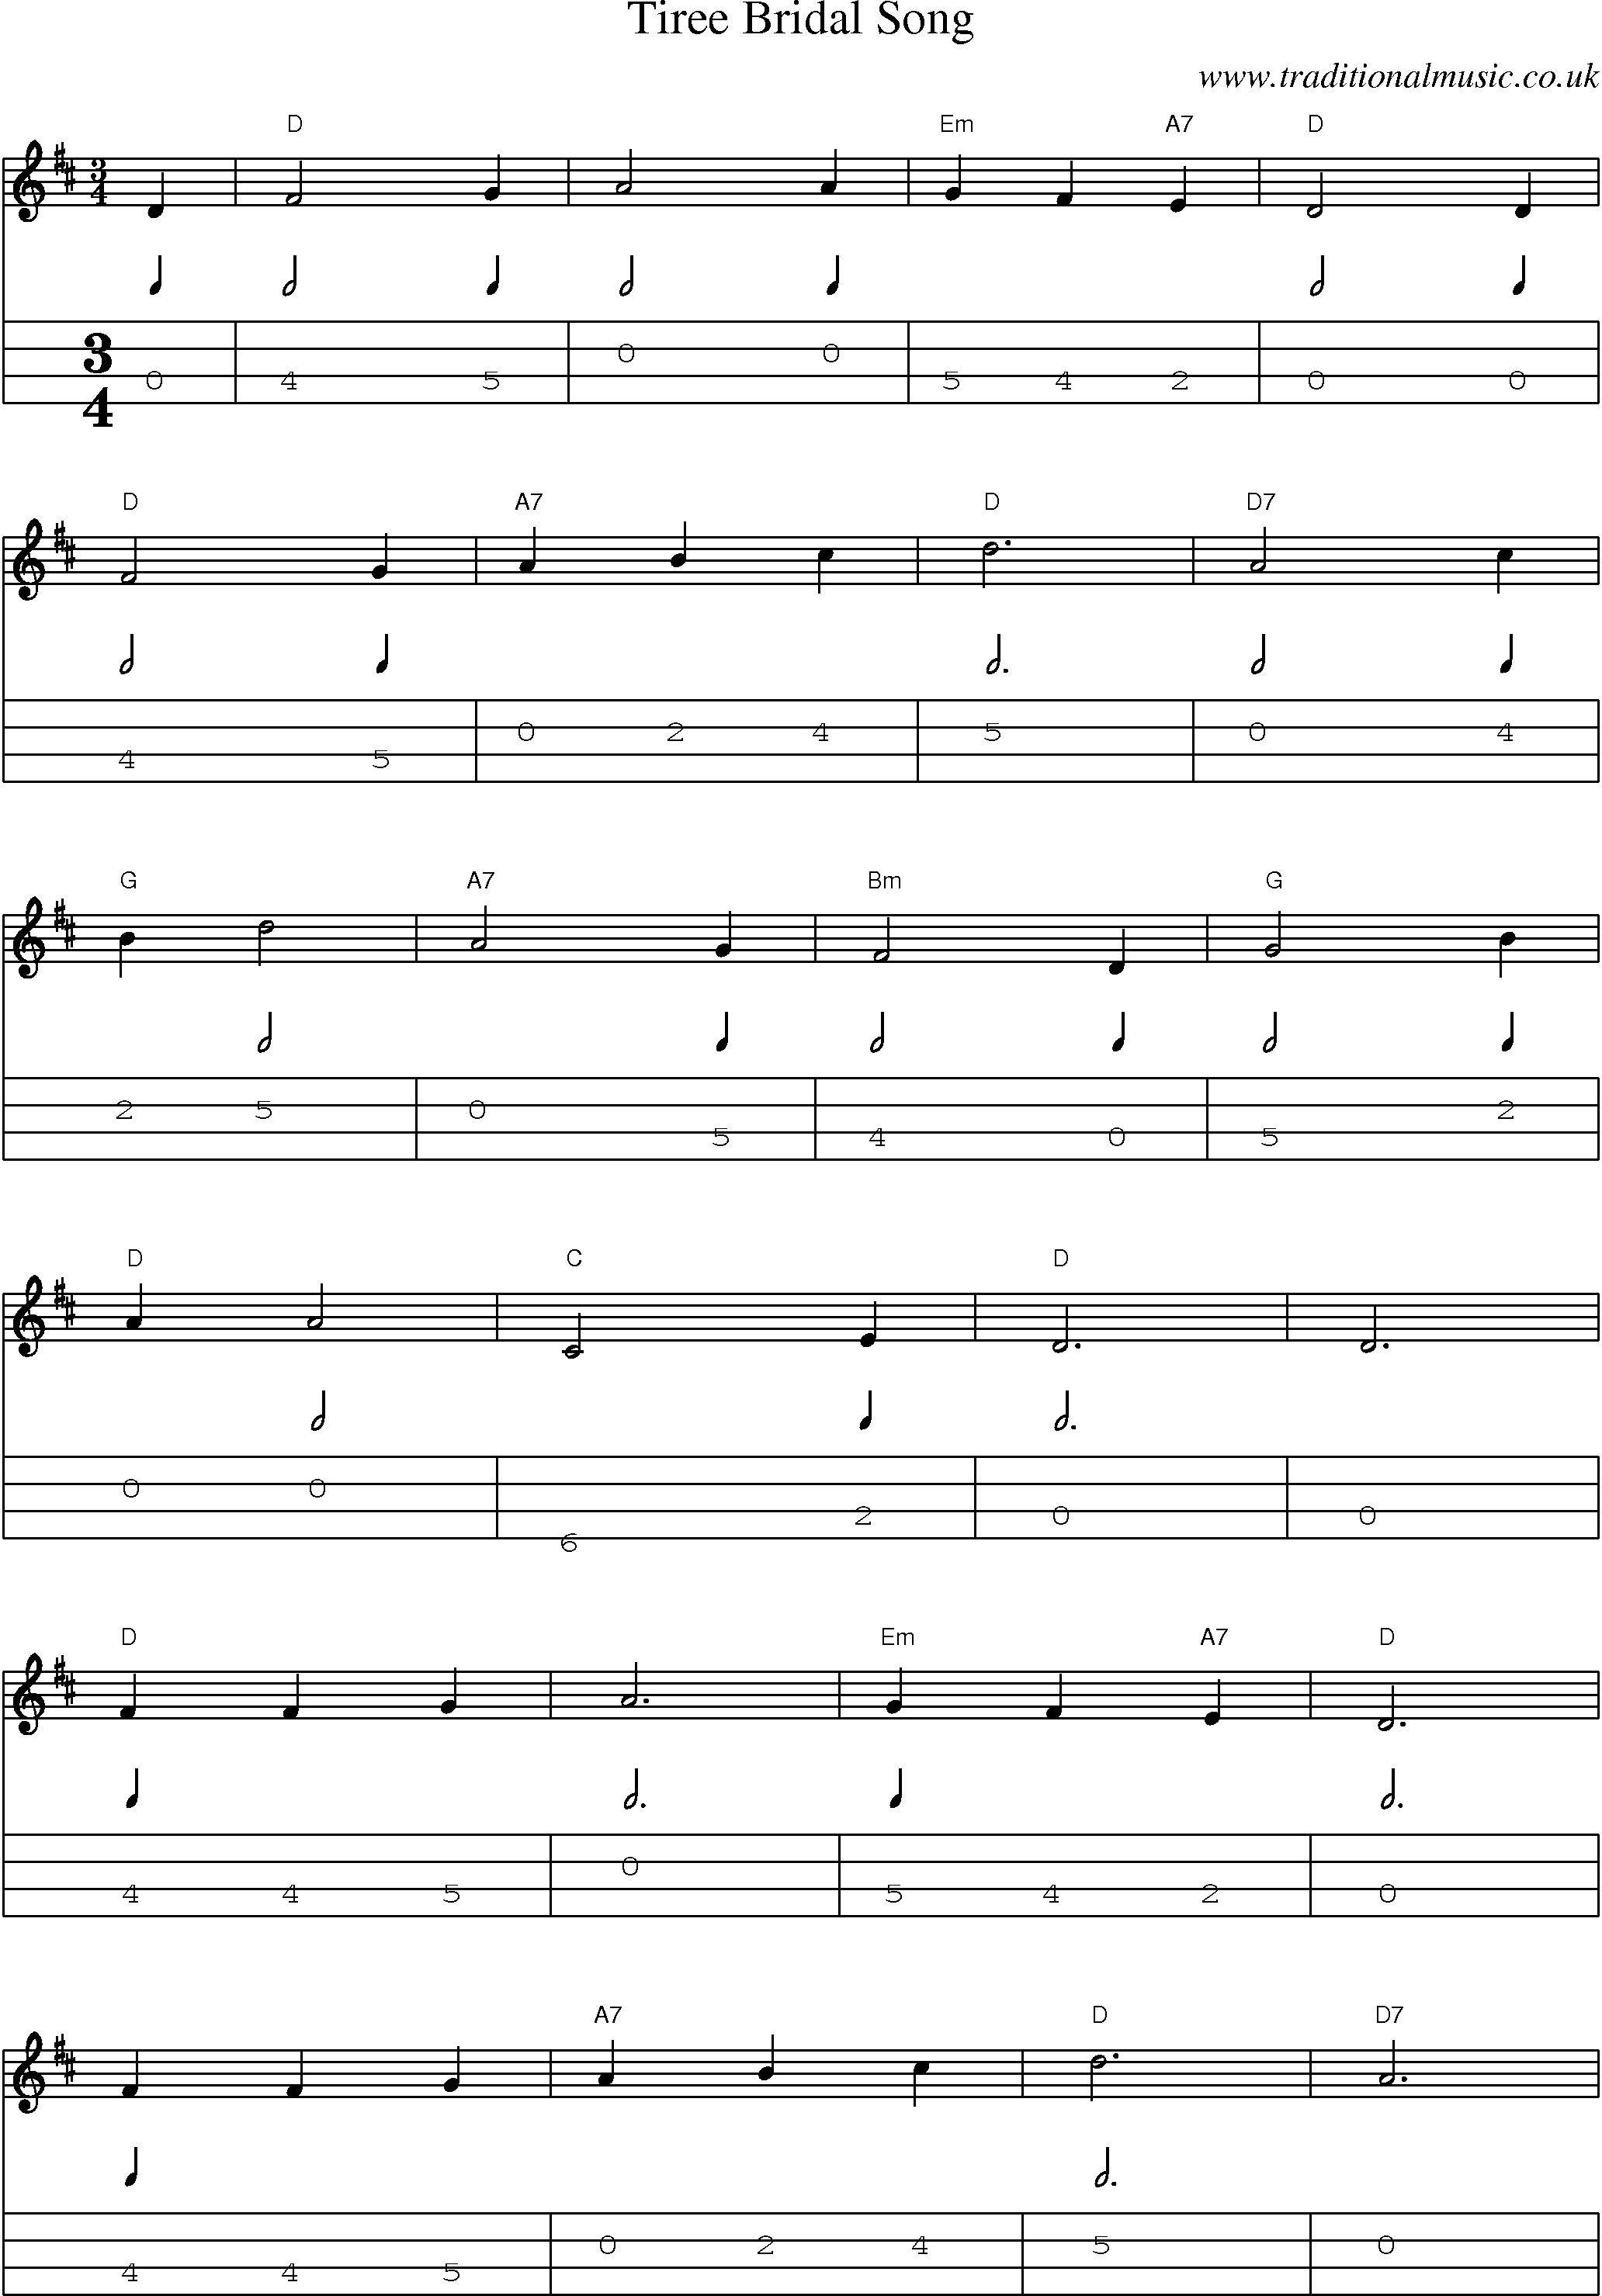 Music Score and Mandolin Tabs for Tiree Bridal Song